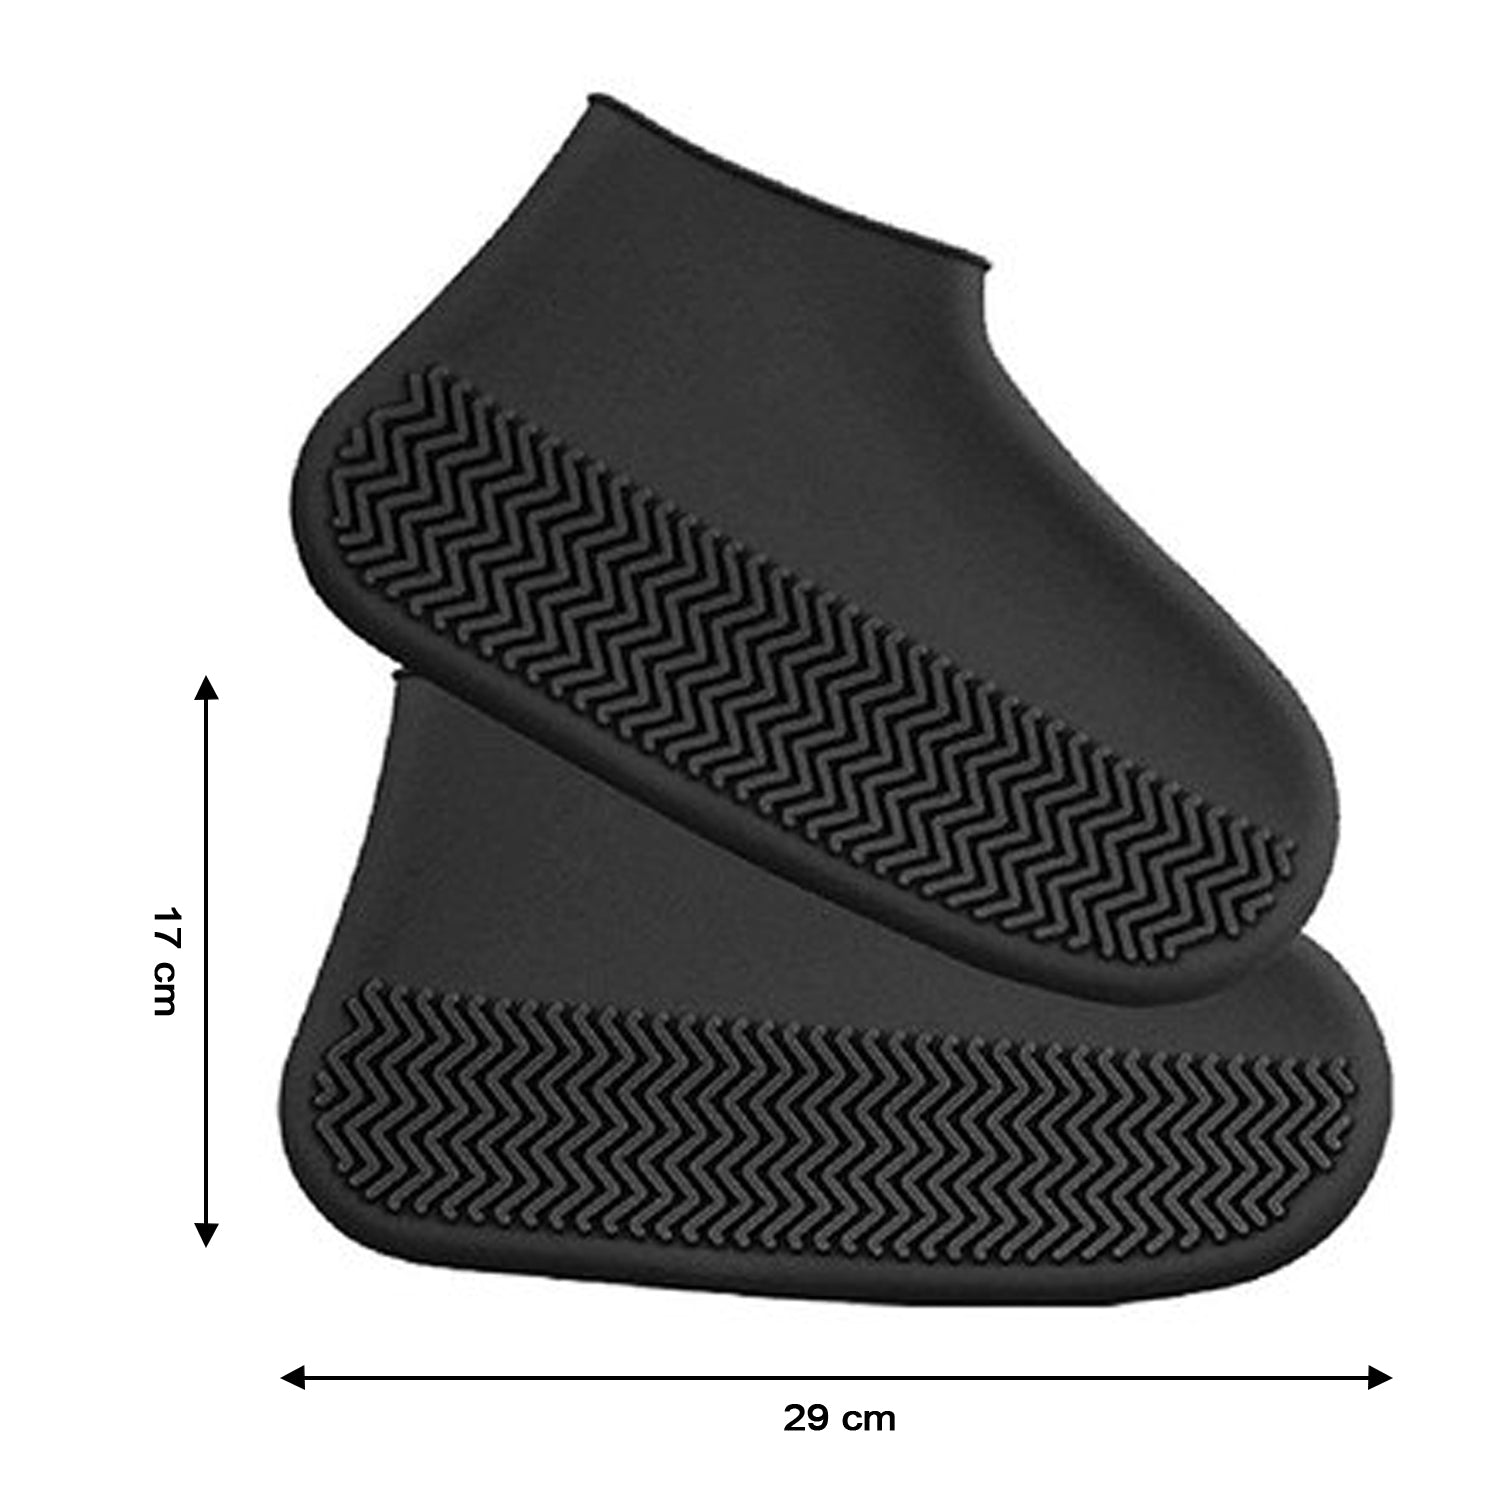 4866 Non-Slip Silicone Rain Reusable Anti skid Waterproof Fordable Boot Shoe Cover ( Large ) DeoDap